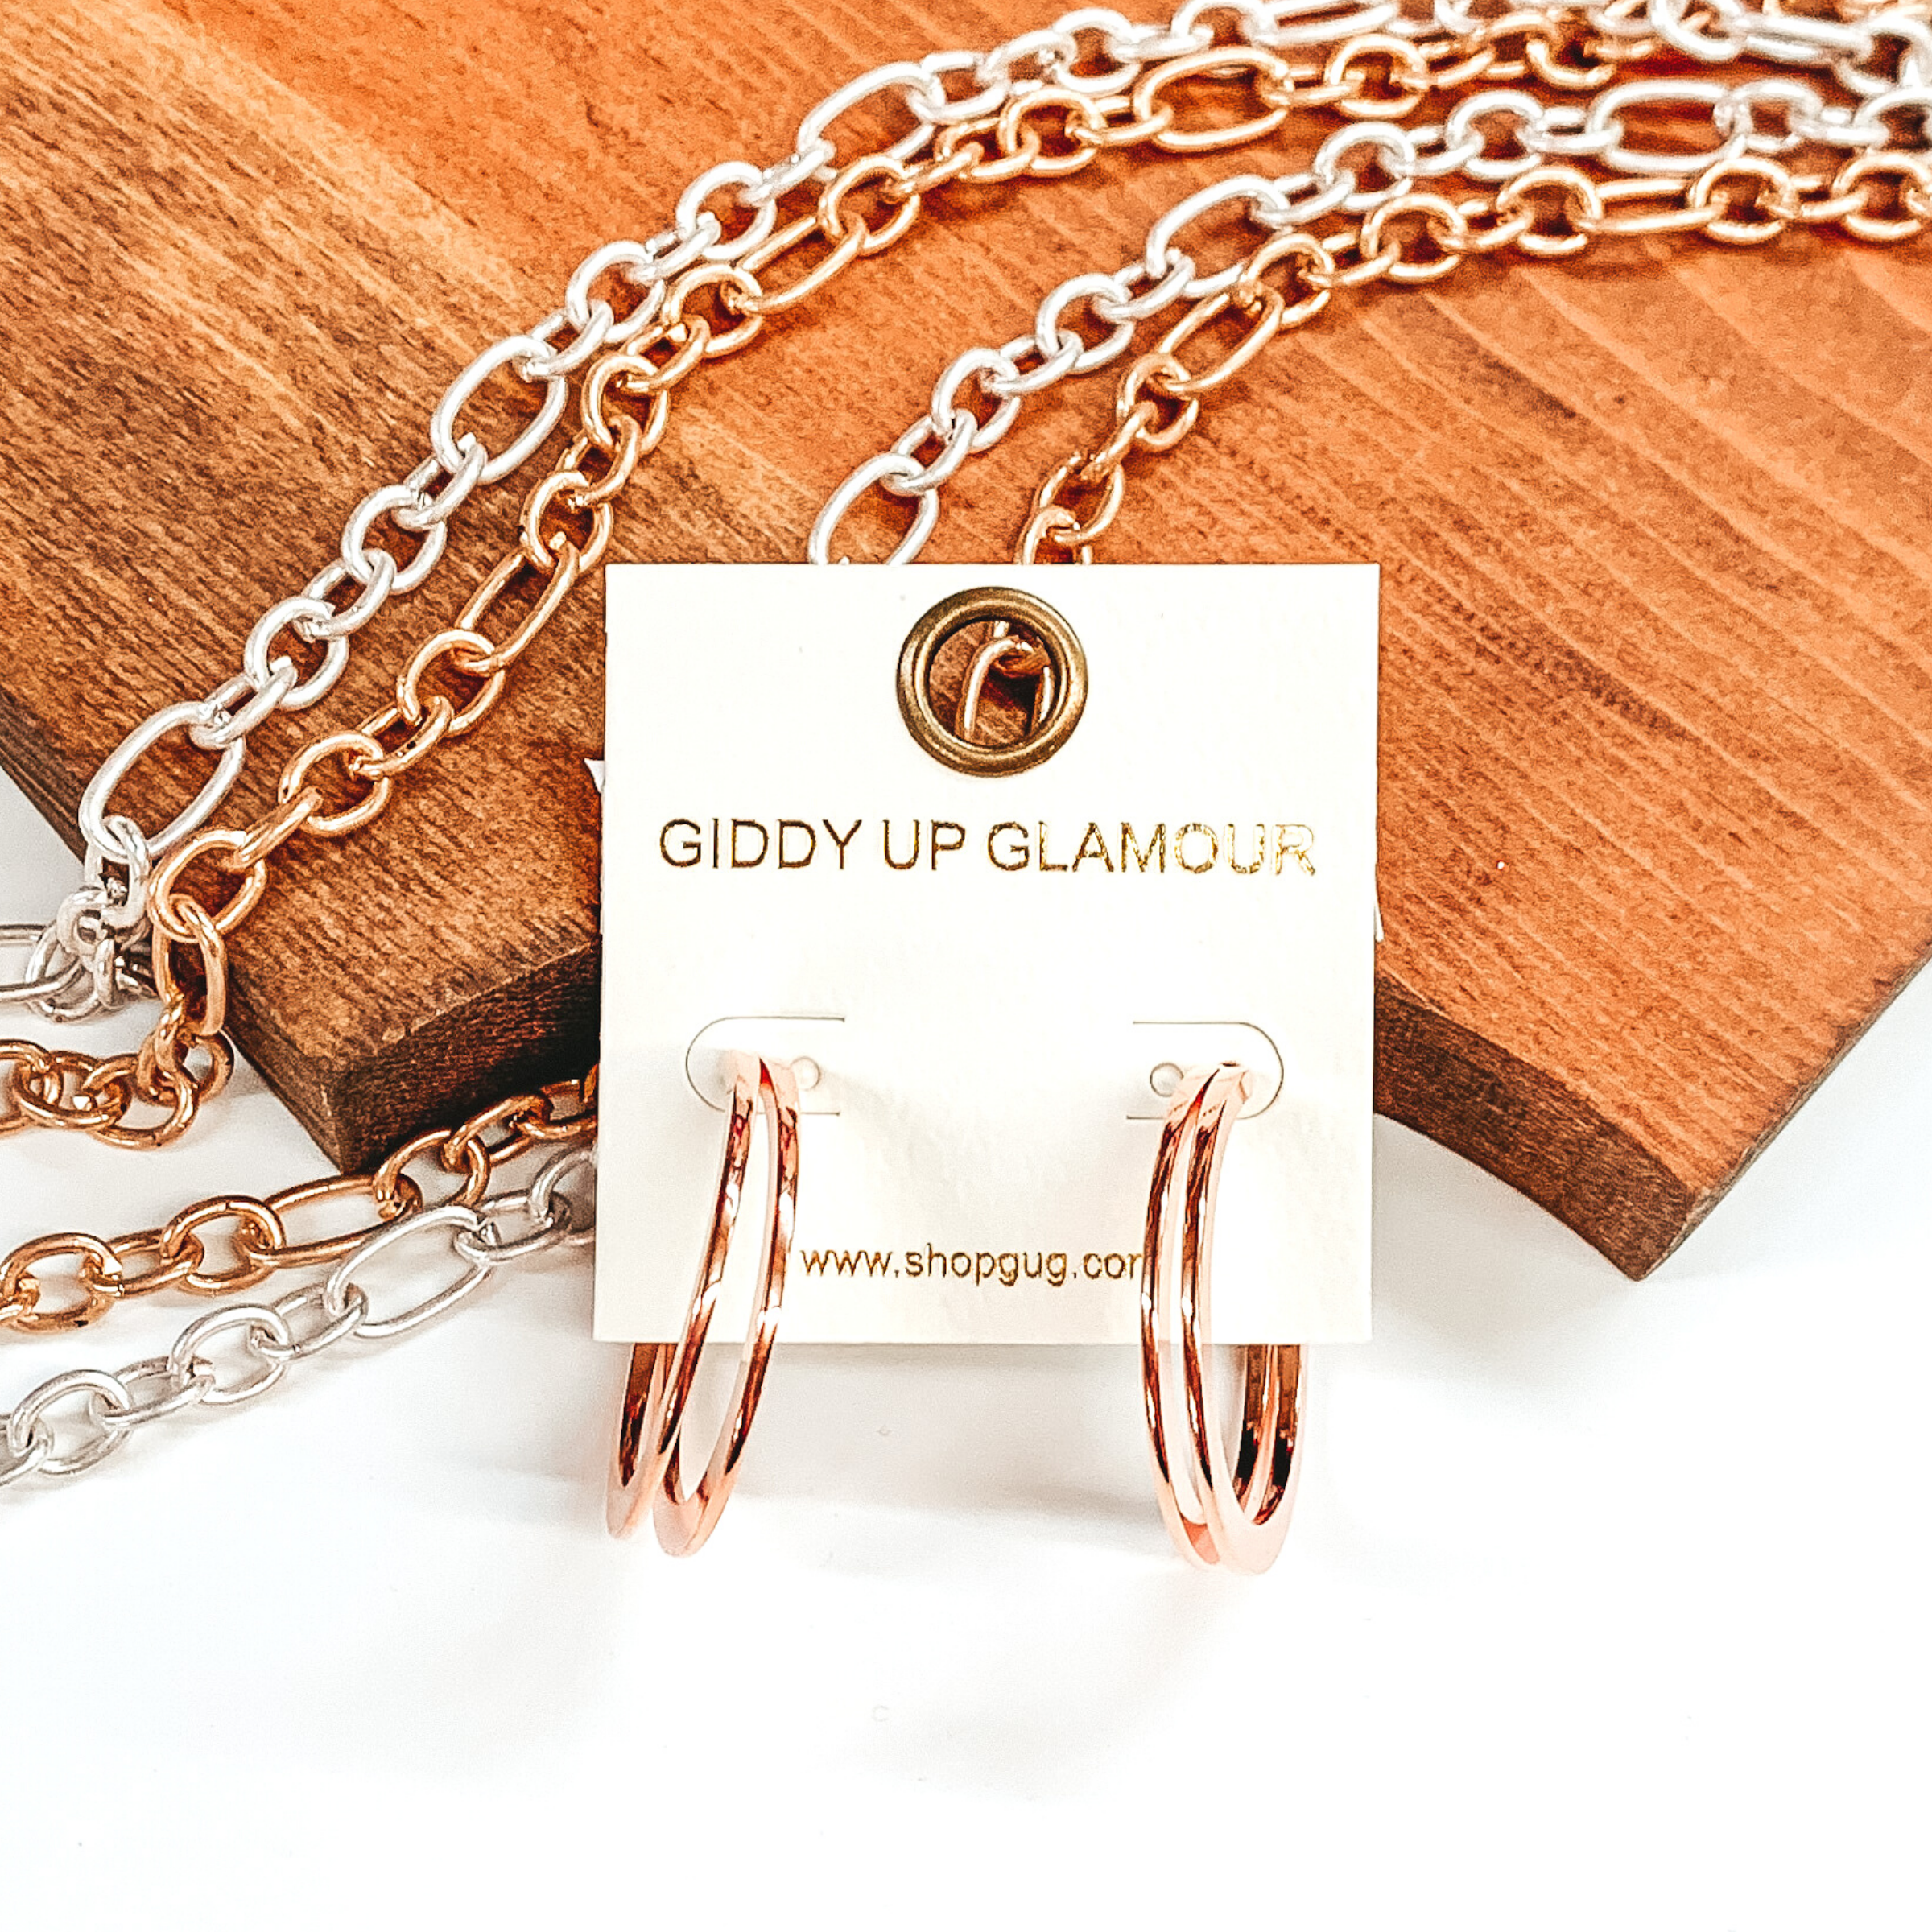 Rose gold colored circle hoops. These hoops have two circles side by side to make a double hoop. These earrings are in front of a piece of wood with silver and gold chains on it pictured on a white background. 